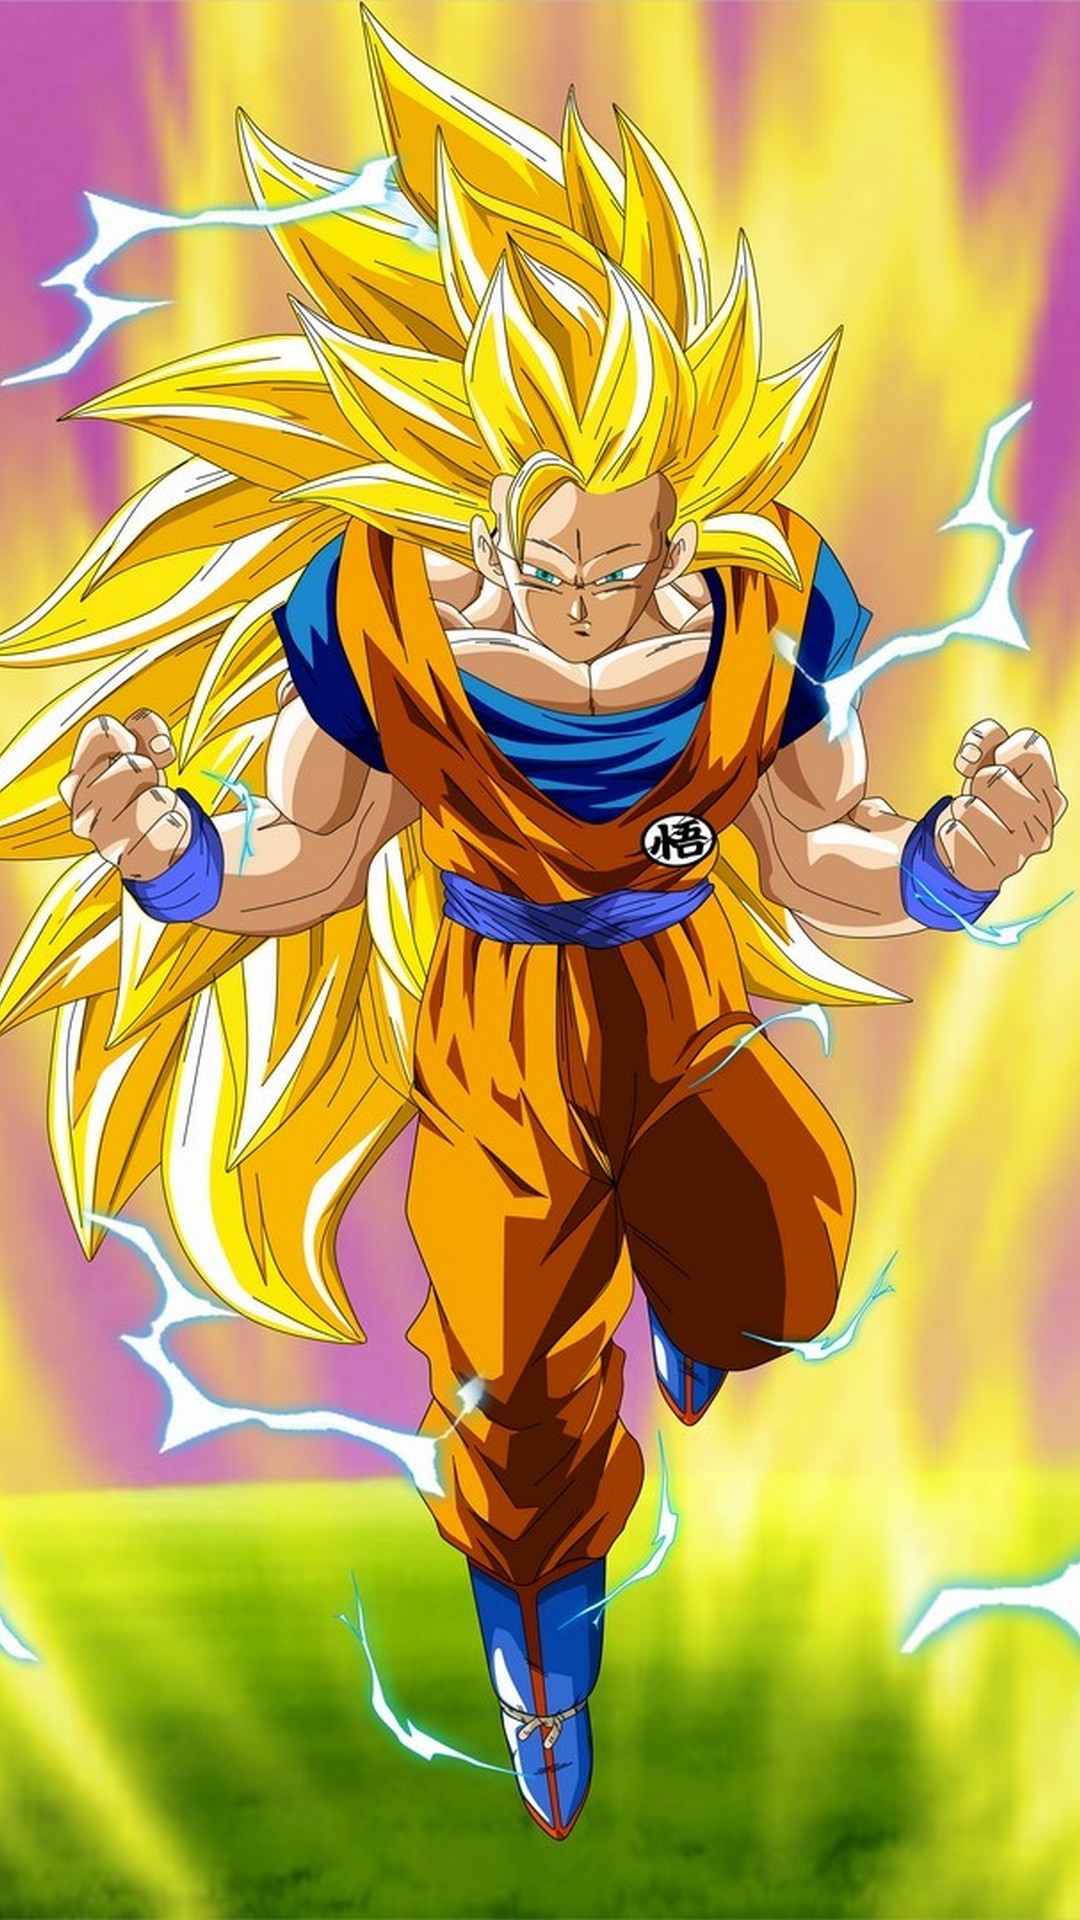 Goku SSJ3 Android Wallpaper   2022 Android Wallpapers 1080x1920